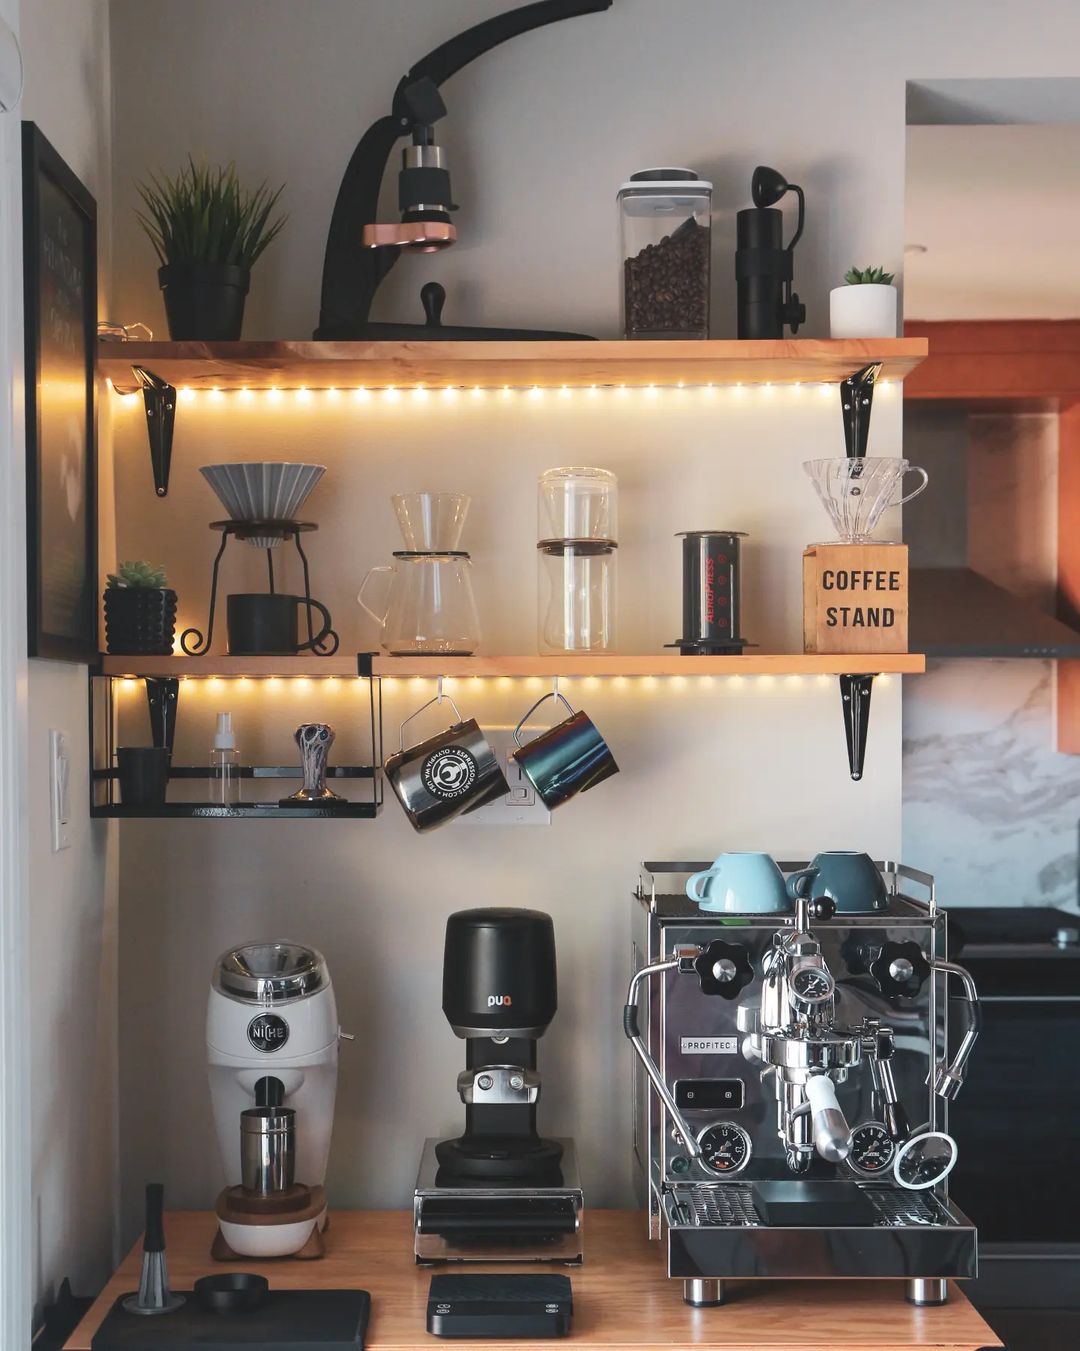 A small coffee bar installed at a wall corner is shown. Photo by Instagram username @bertofcoffee